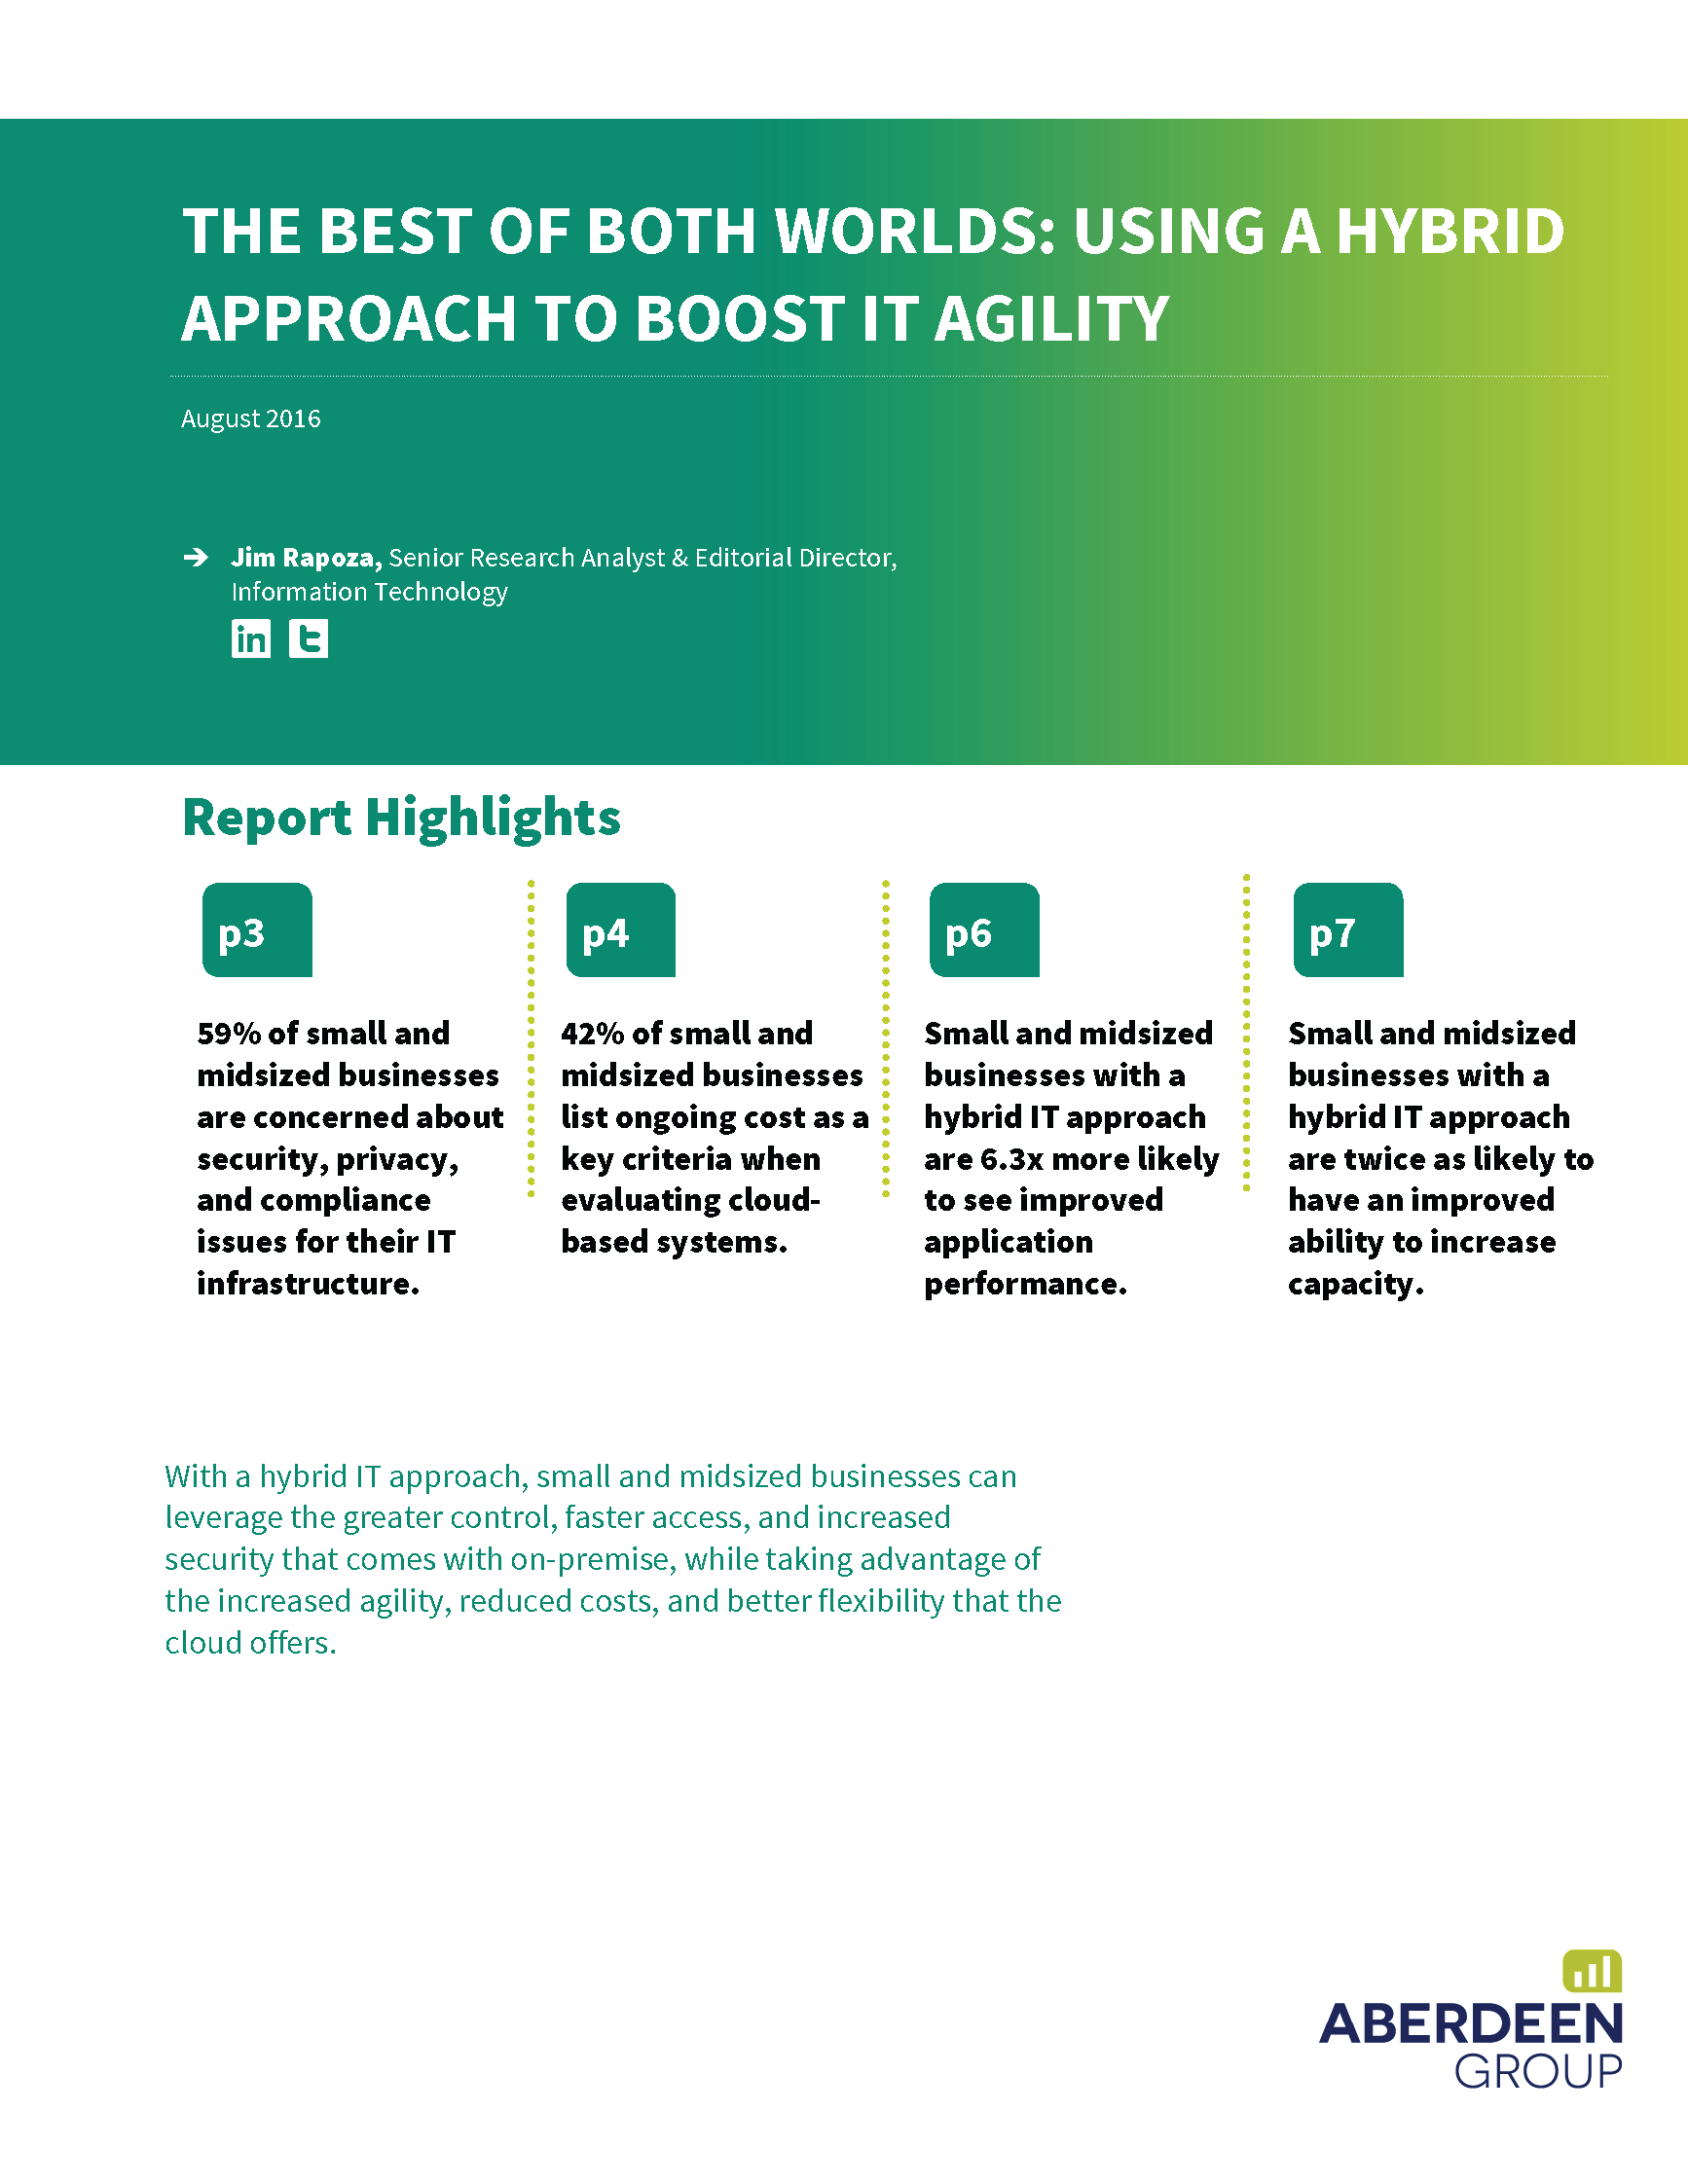 Pages from The Best of Both Worlds_ Using a Hybrid Approach to Boost IT Agility